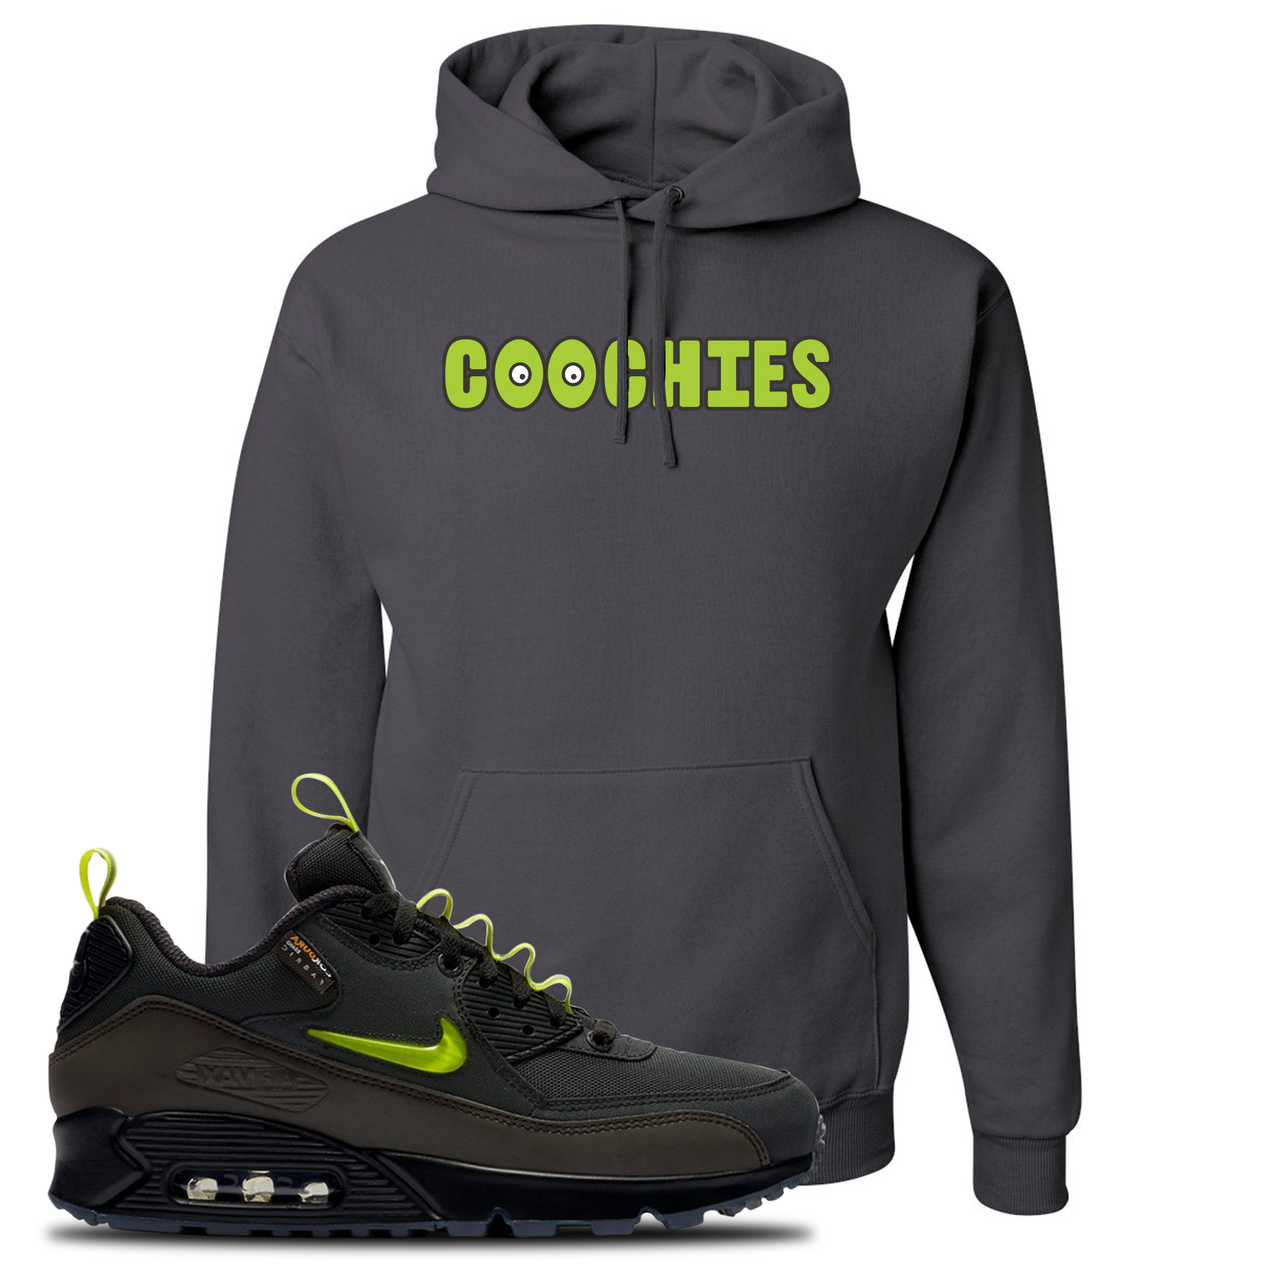 The Basement X Air Max 90 Manchester Coochies Charcoal Gray Sneaker Hook Up Pullover Hoodie